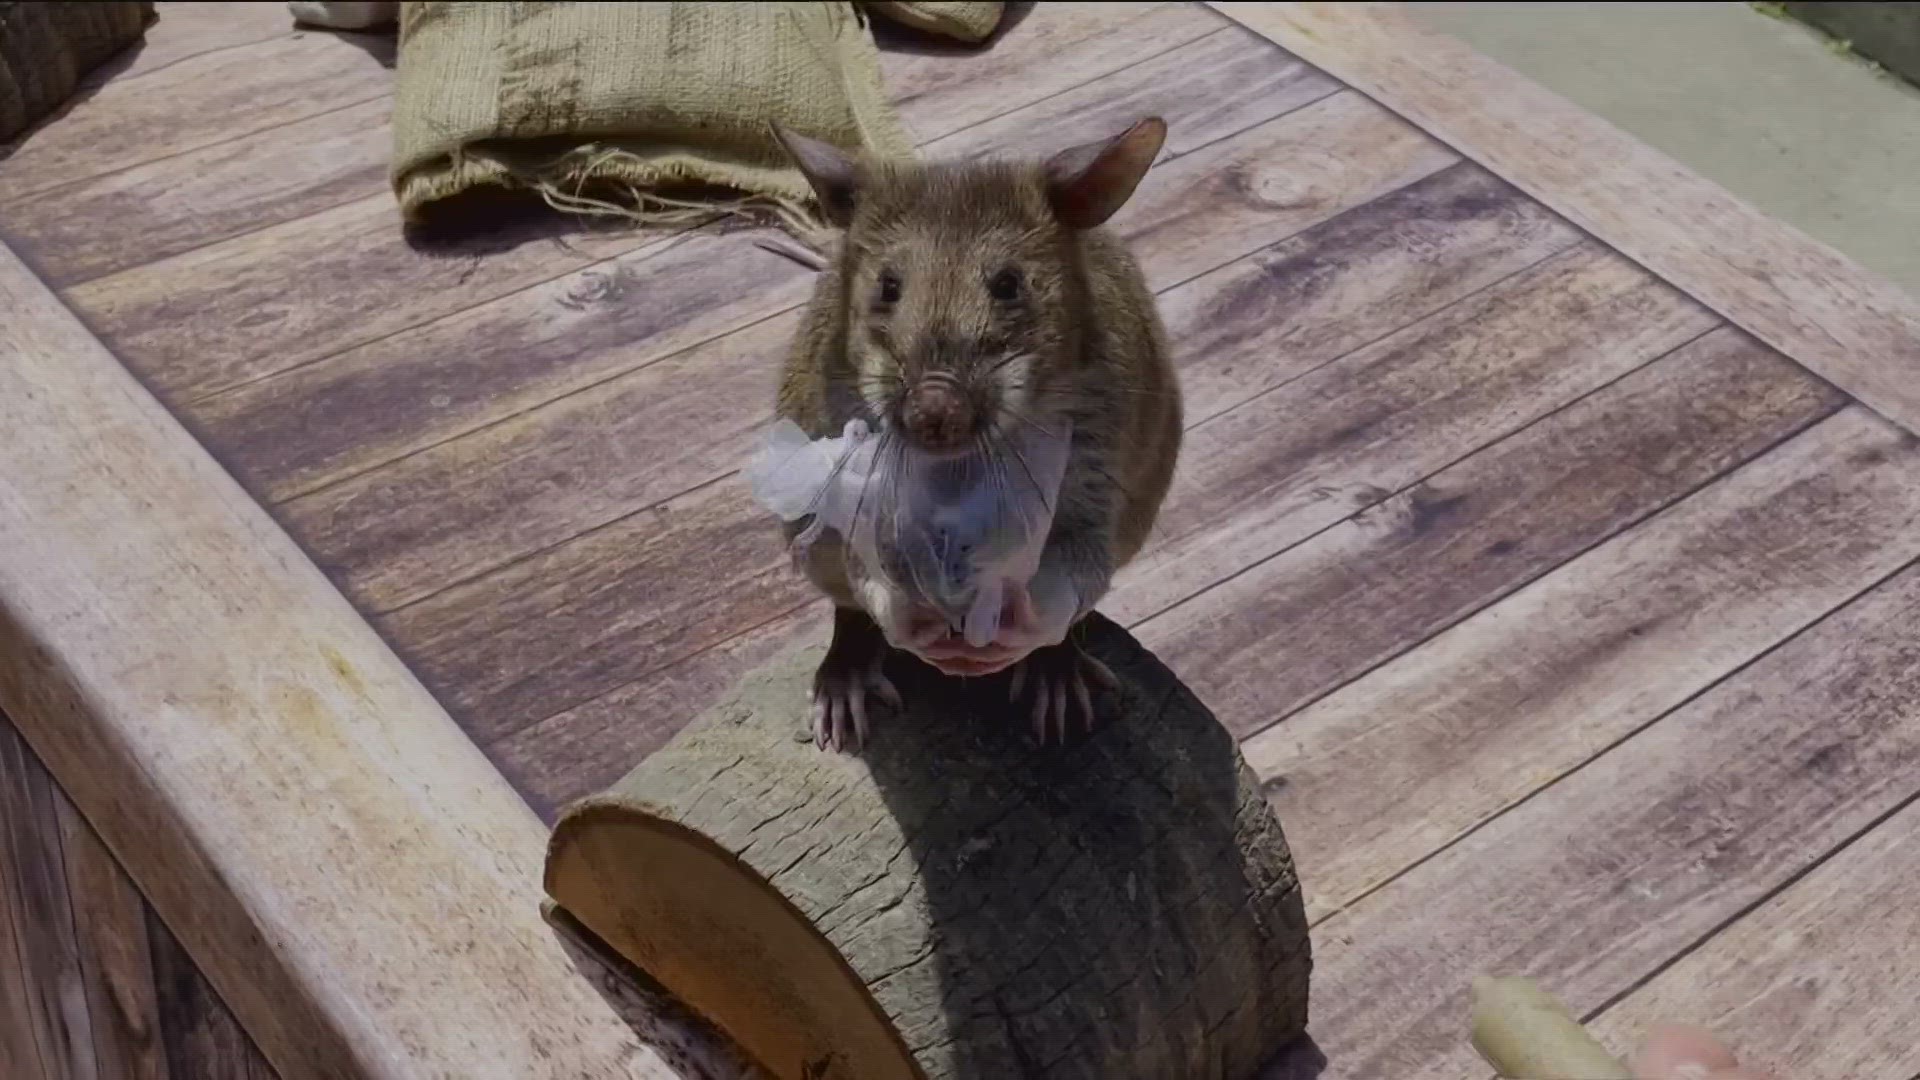 The African Pouched Rat can be trained with a ‘target scent’ to find illegally trafficked wildlife, landmines, and even help in human recovery operations.